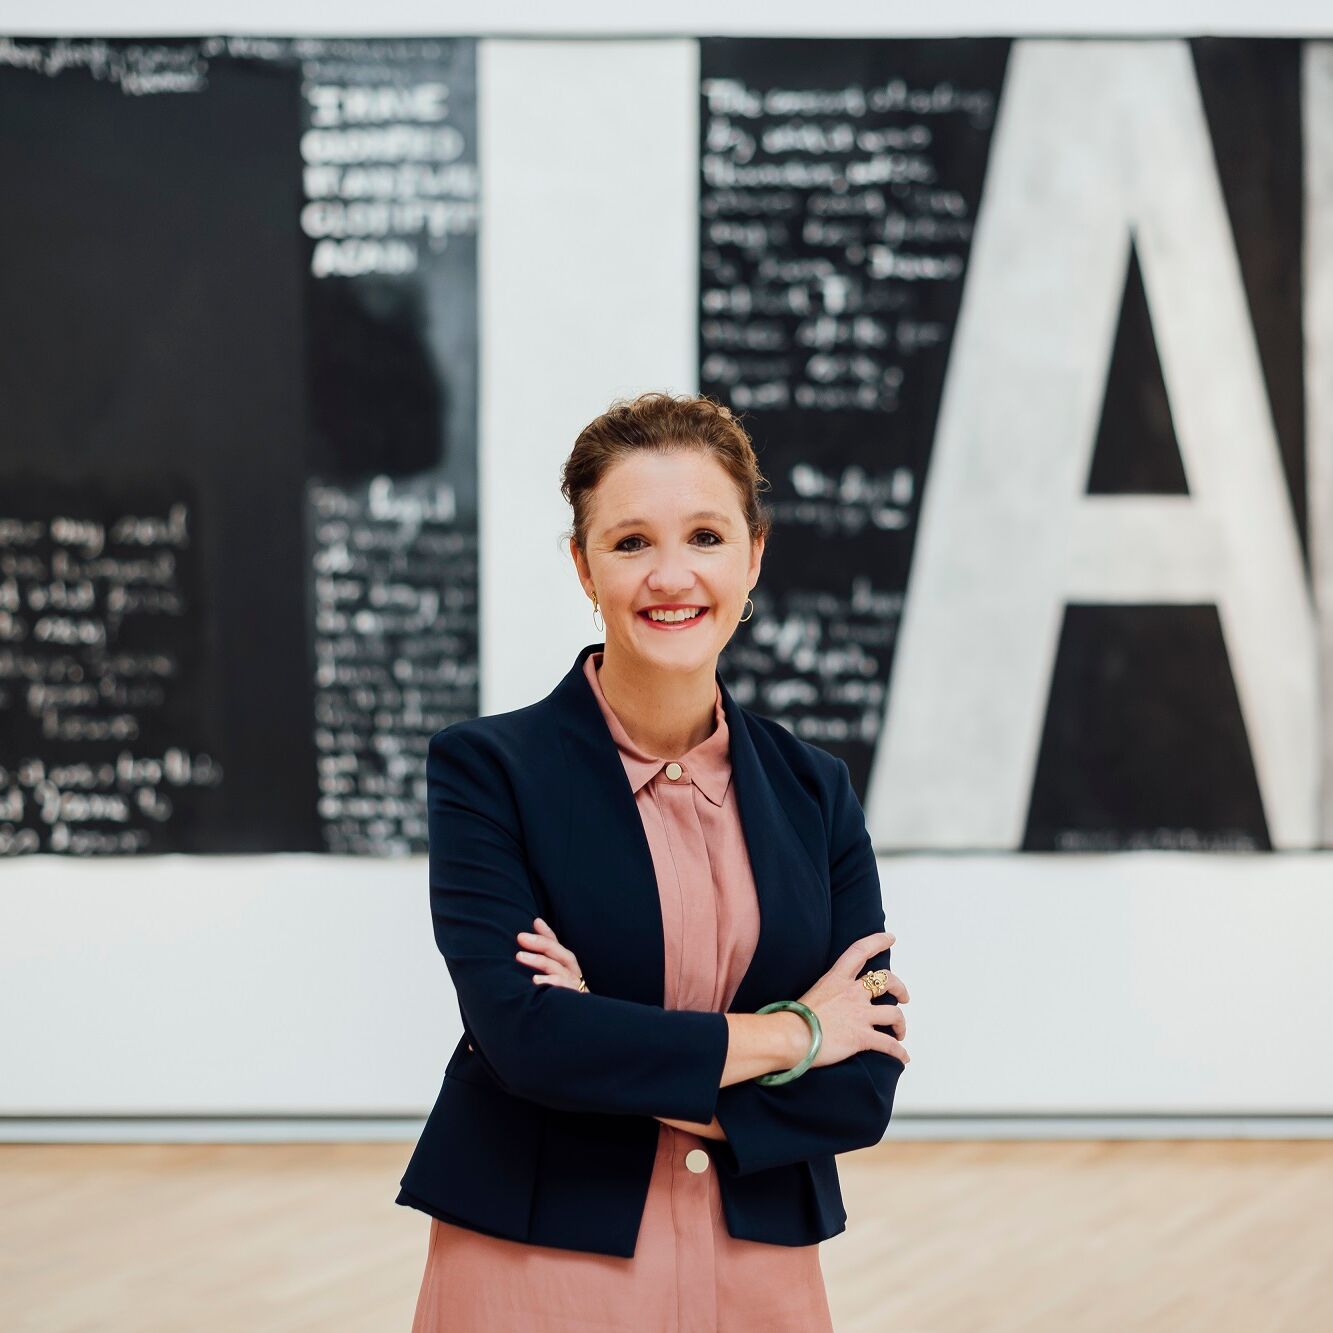 Image: New Auckland Art Gallery Director Kirsten Paisley
Image Credit:  Photography by Rohan Thomson. Artwork shown in background: Colin McCahon, Victory over death 2, 1970, National Gallery of Australia. Gift of the New Zealand Government 1978